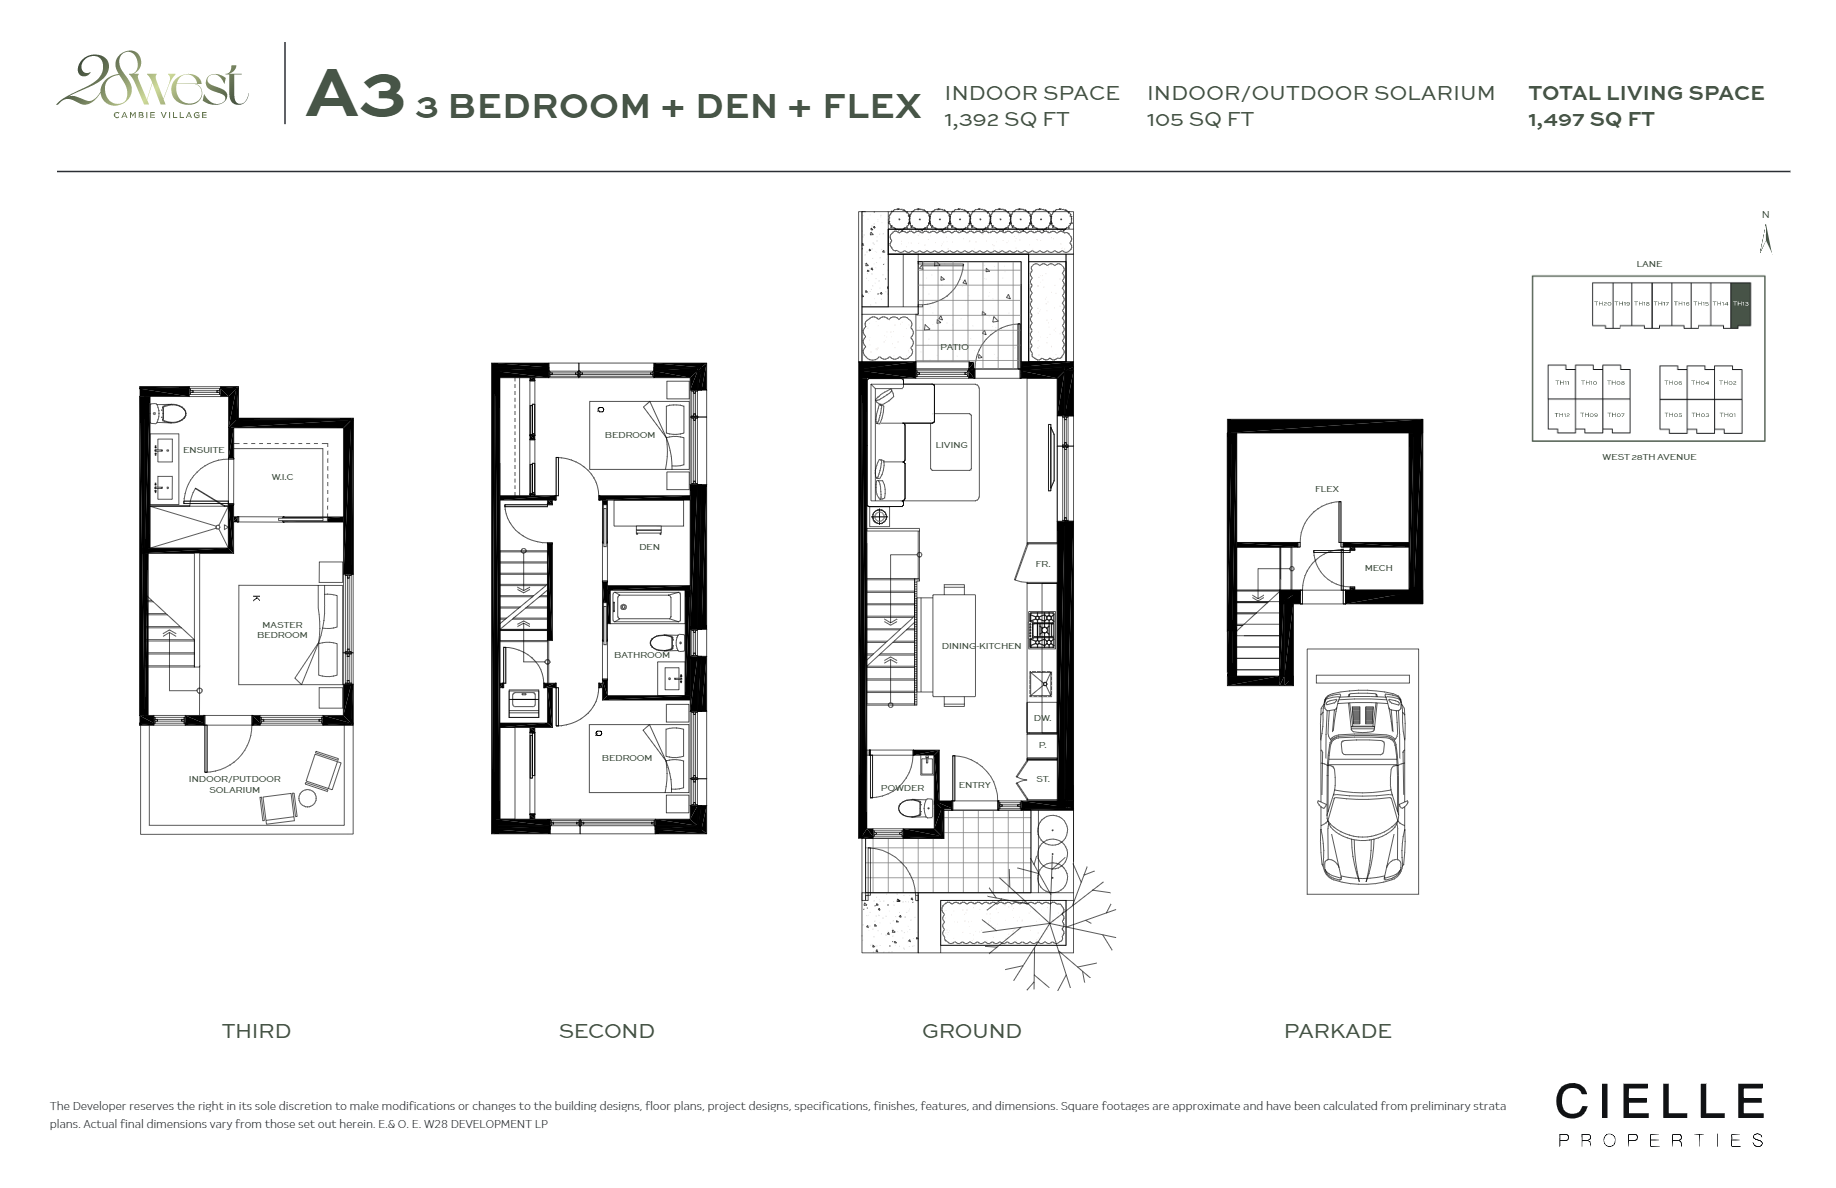 Suite A3 Floor Plan of 28West Towns with undefined beds